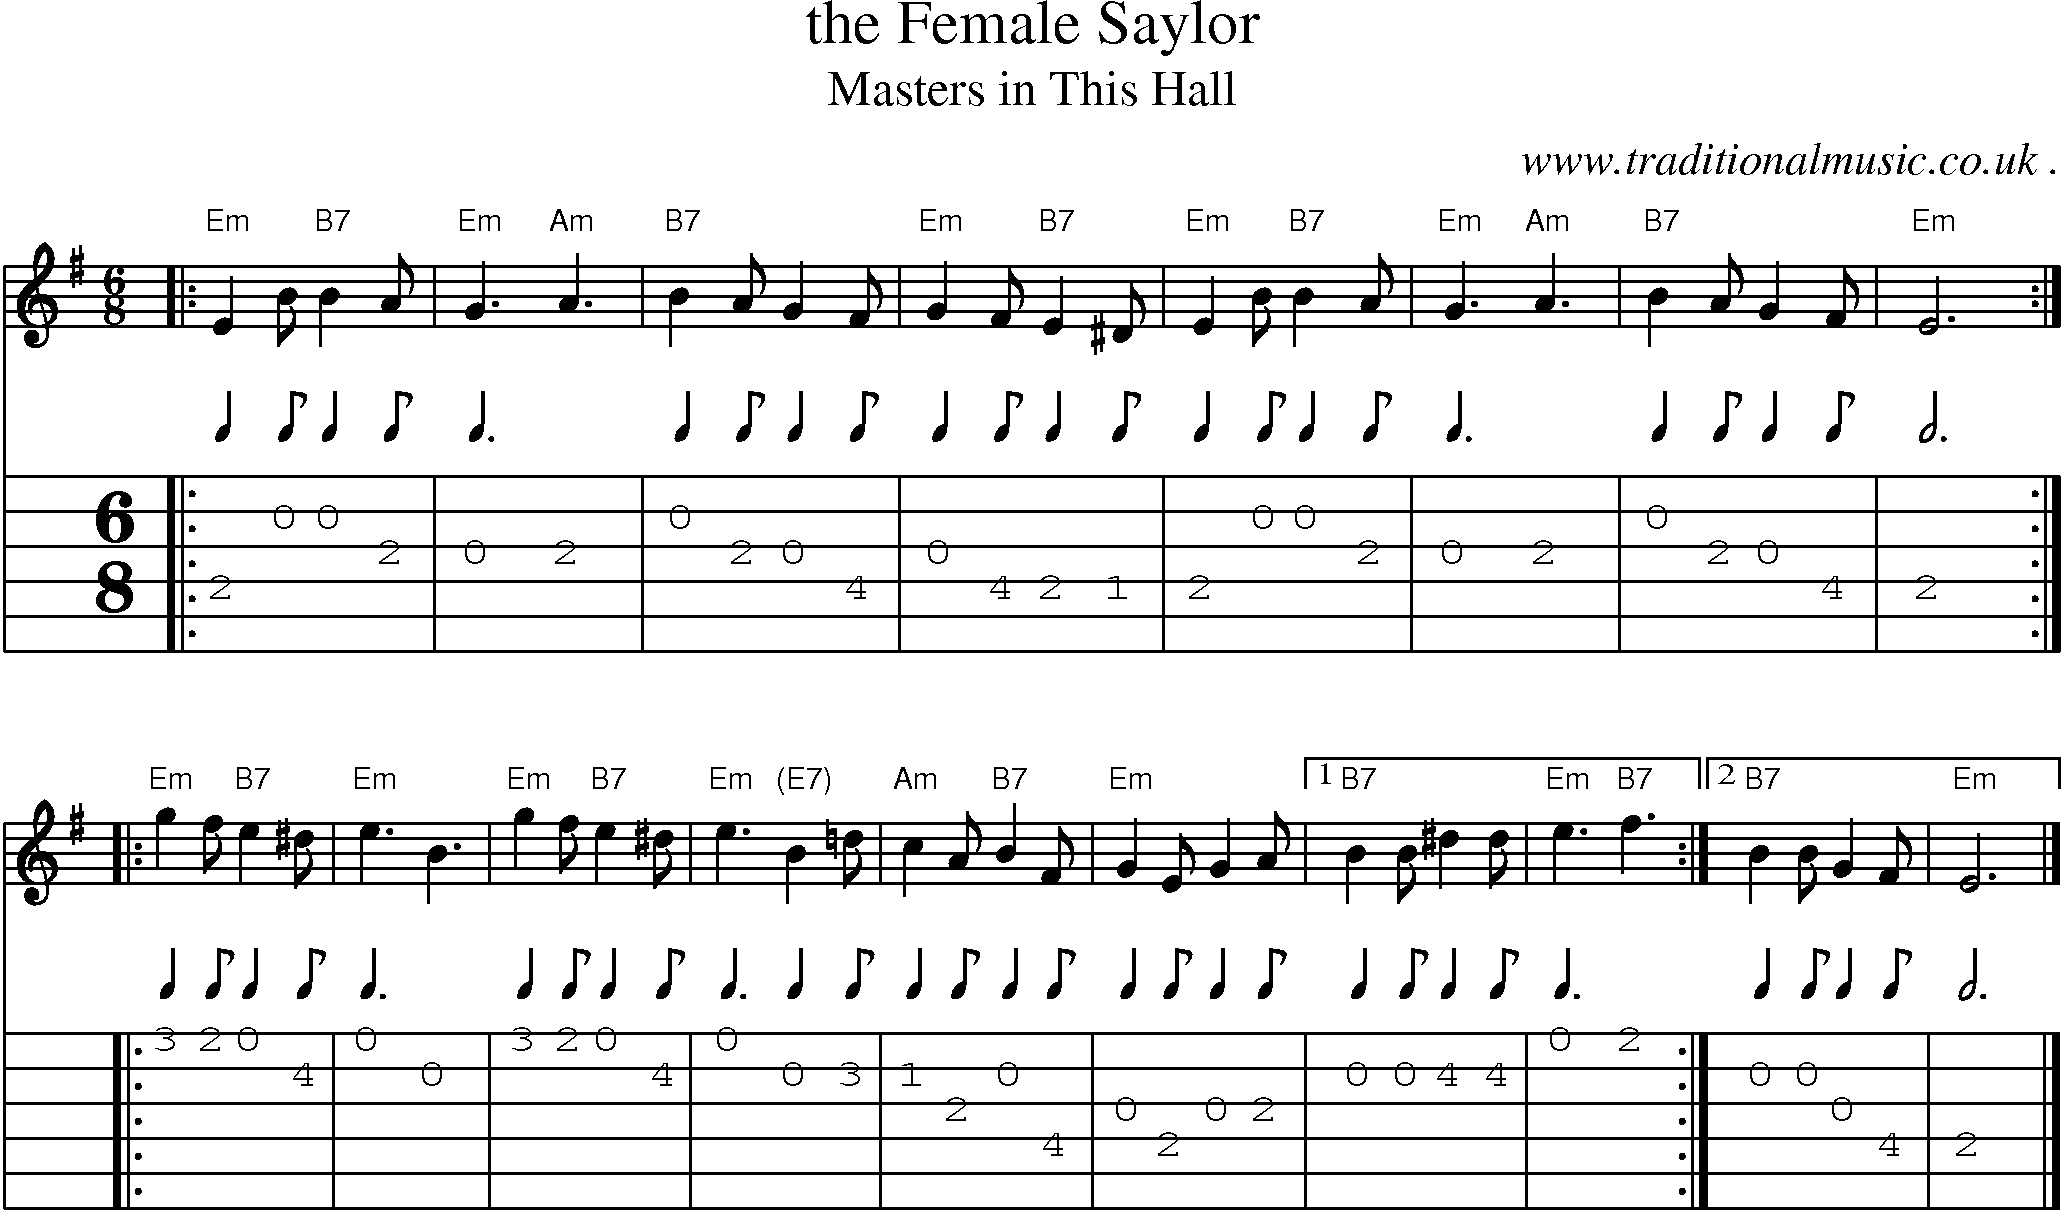 Sheet-music  score, Chords and Guitar Tabs for The Female Saylor